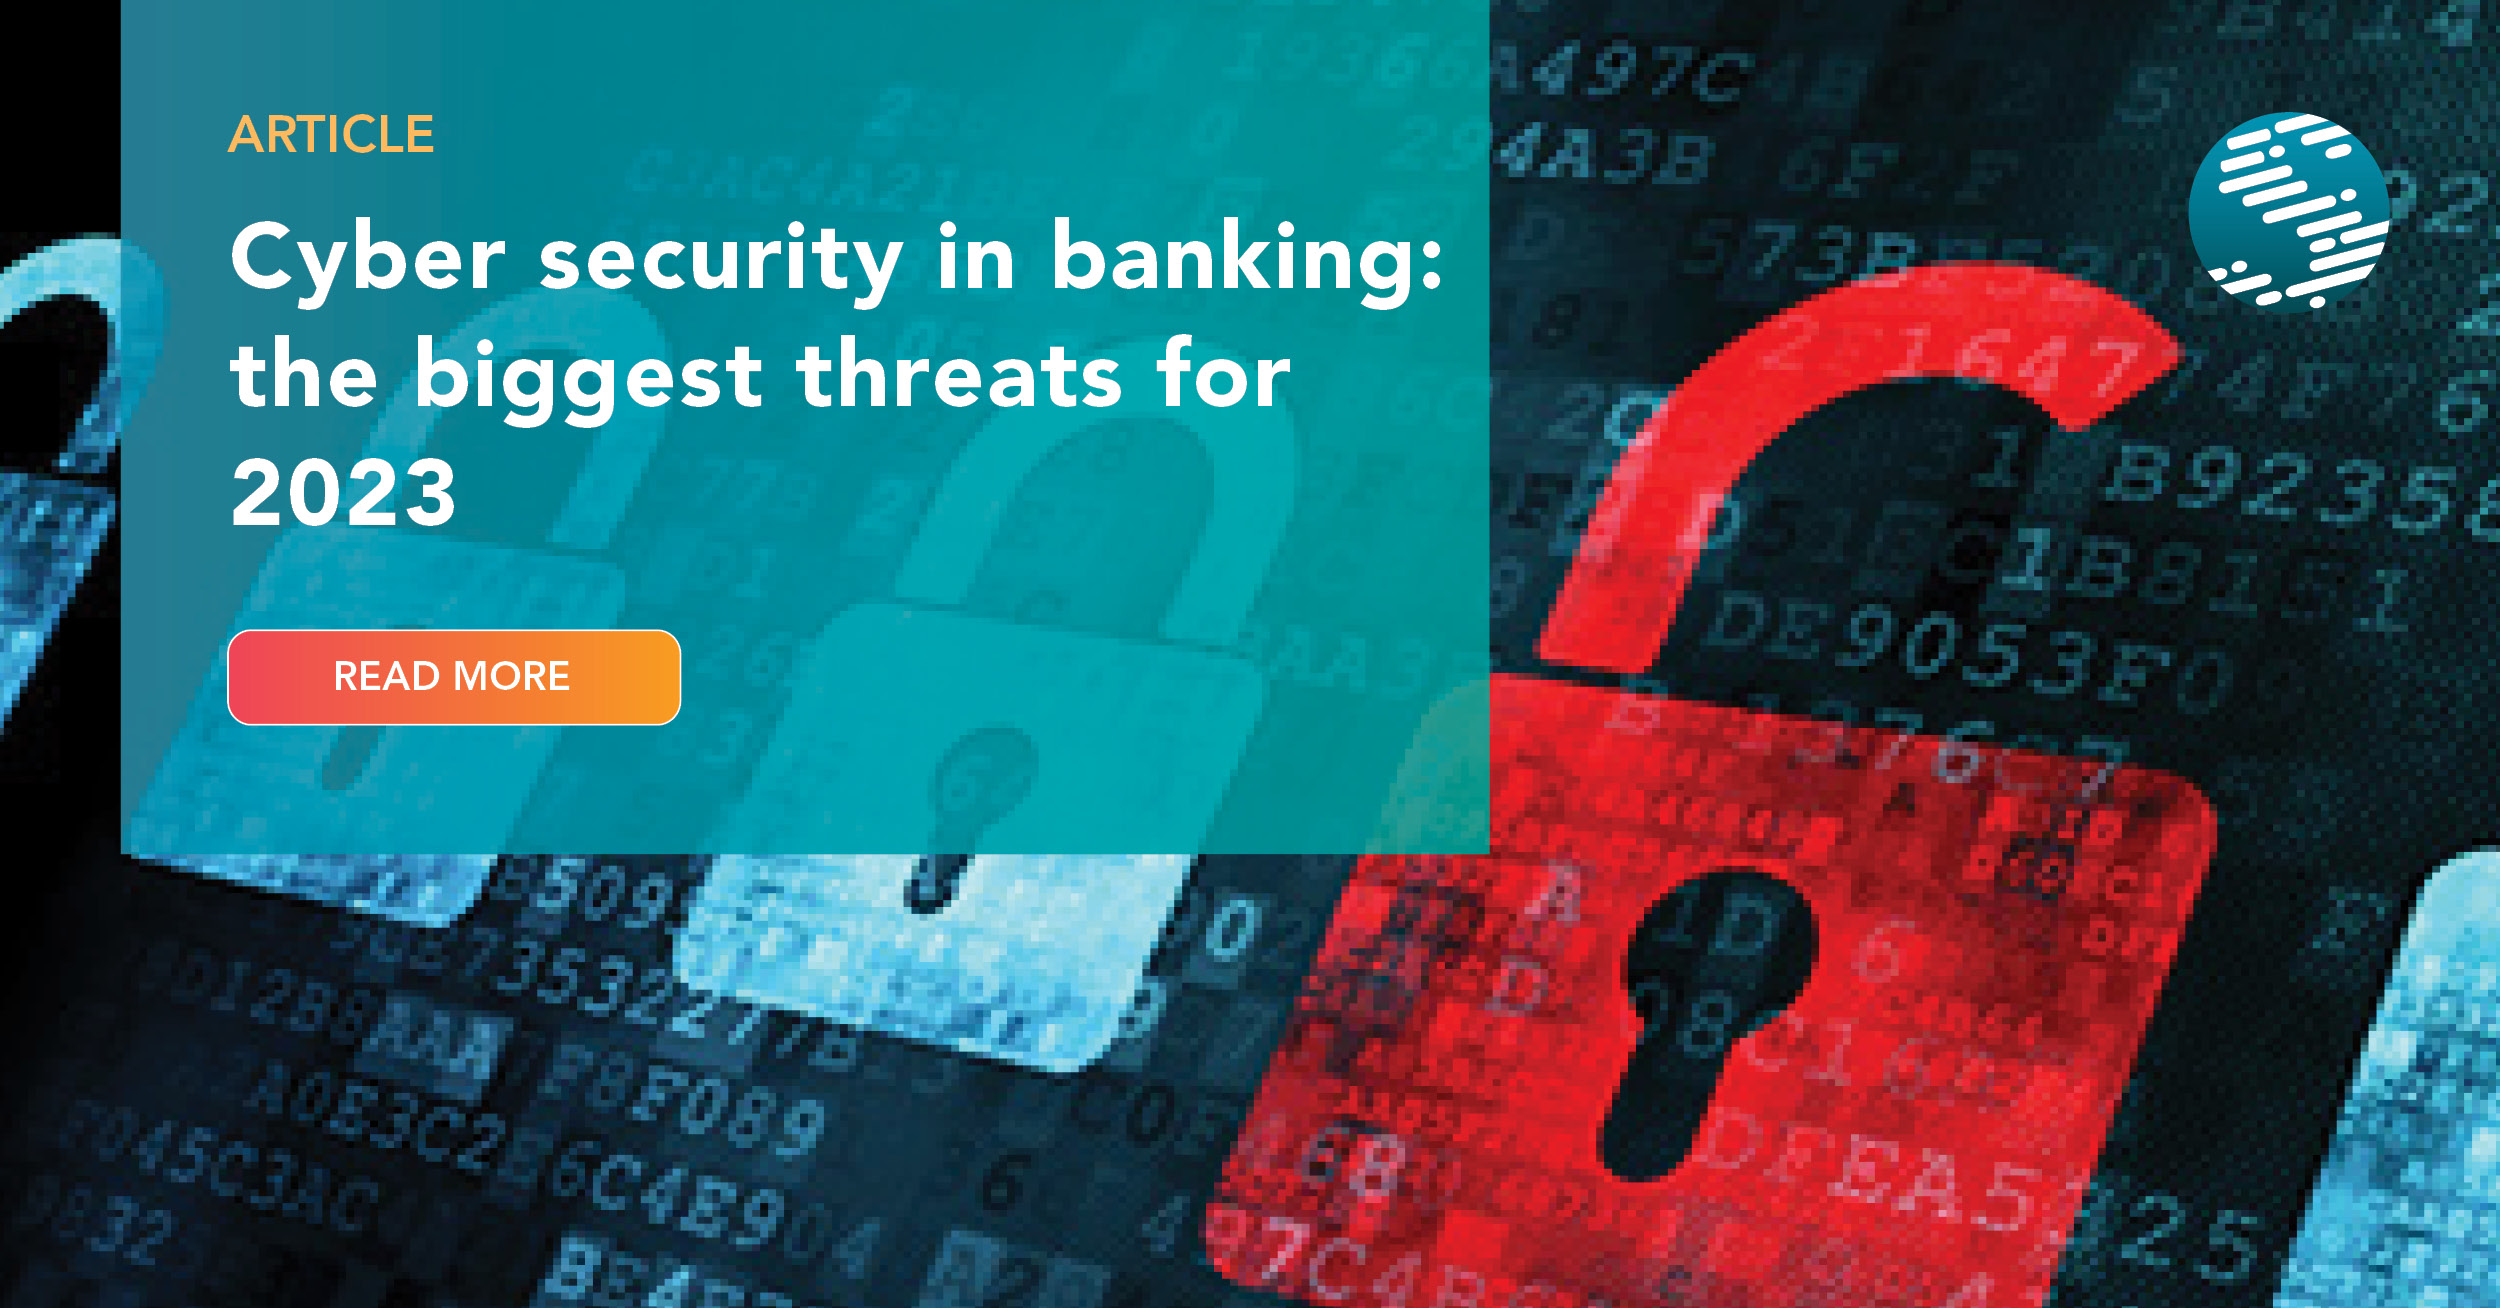 Cyber security in banking: the 5 biggest threats for 2023